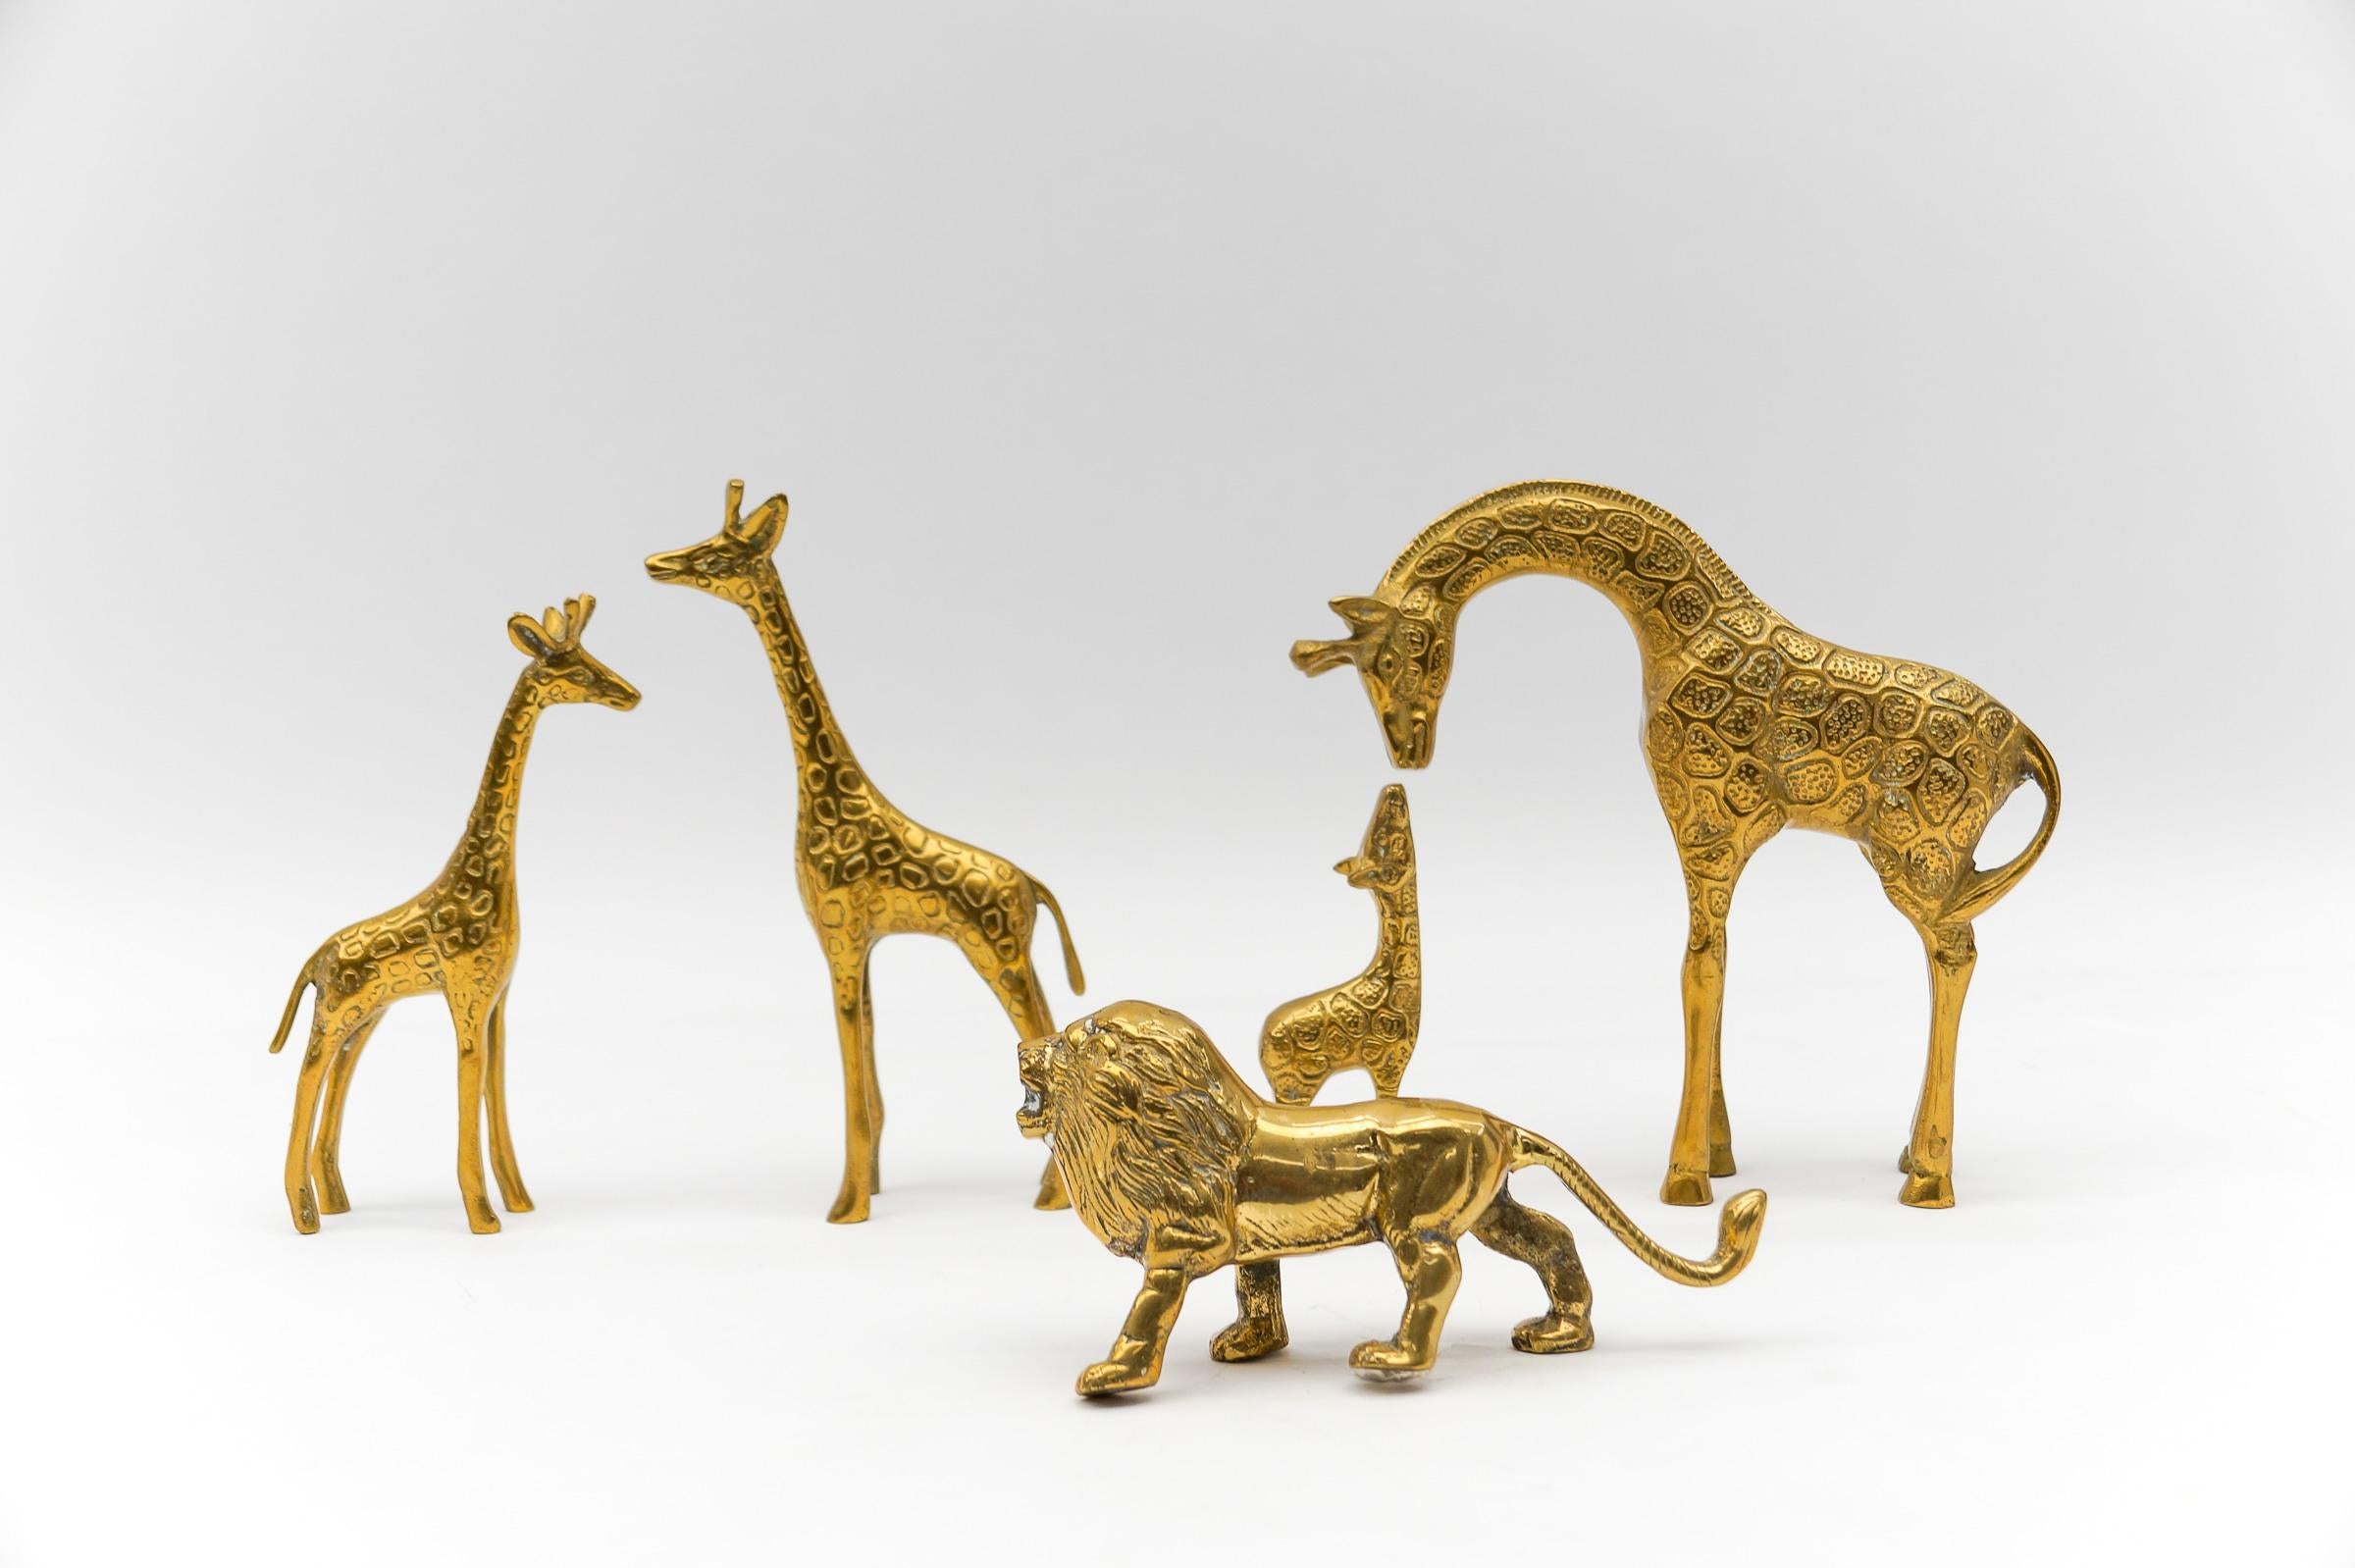 Rare Set of 4 Mid-Century Modern Brass Giraffes & a Brass Lion, 1960s

The proportions are wonderfully genuine, the horse amazingly high and the eye-catcher par excellence.

The giraffes are between 13-21.5cm (5.11 in - 8.46 in) high, between